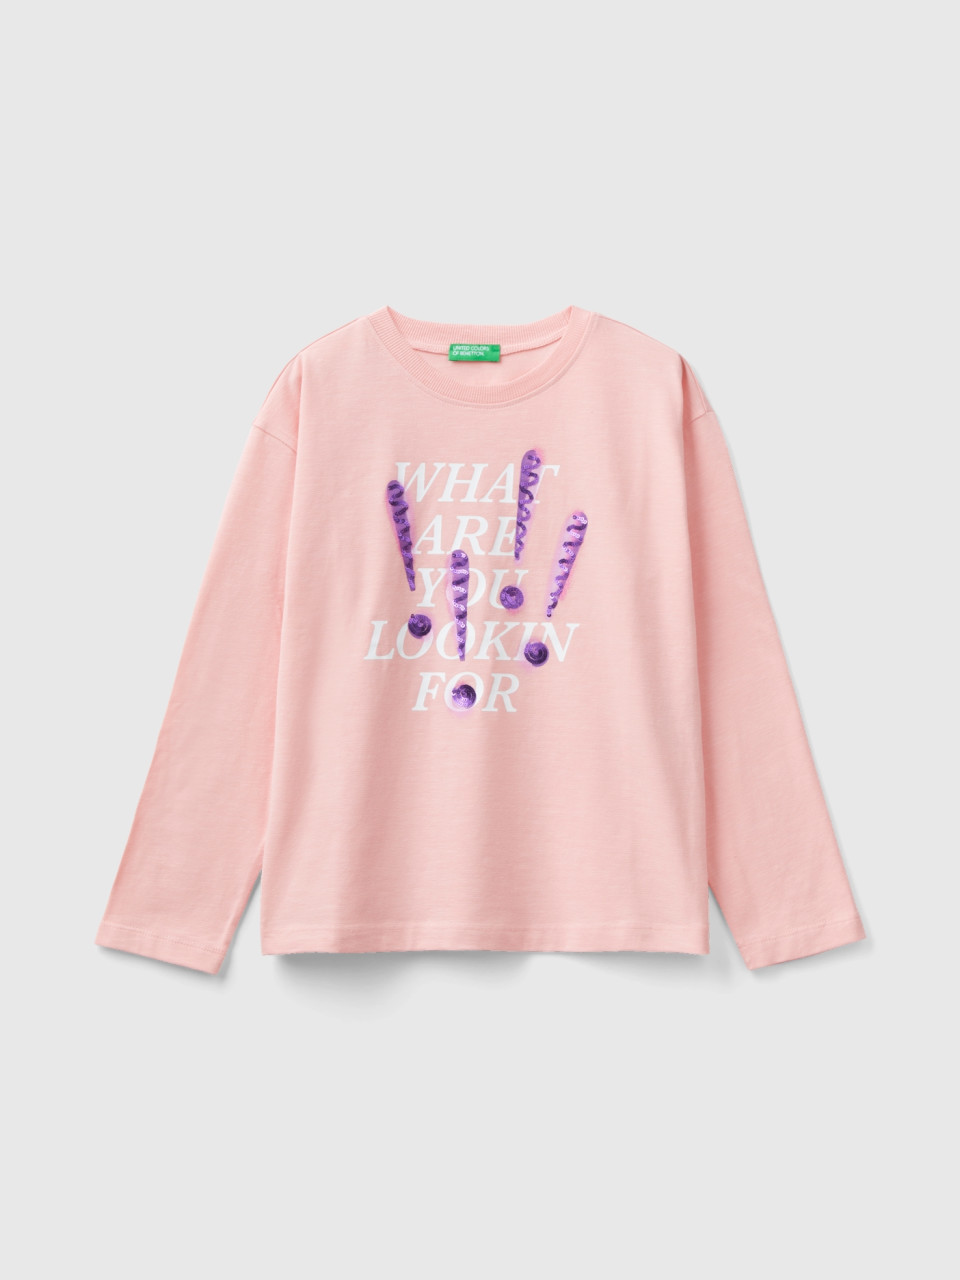 Benetton, T-shirt With Print And Sequins, Pink, Kids